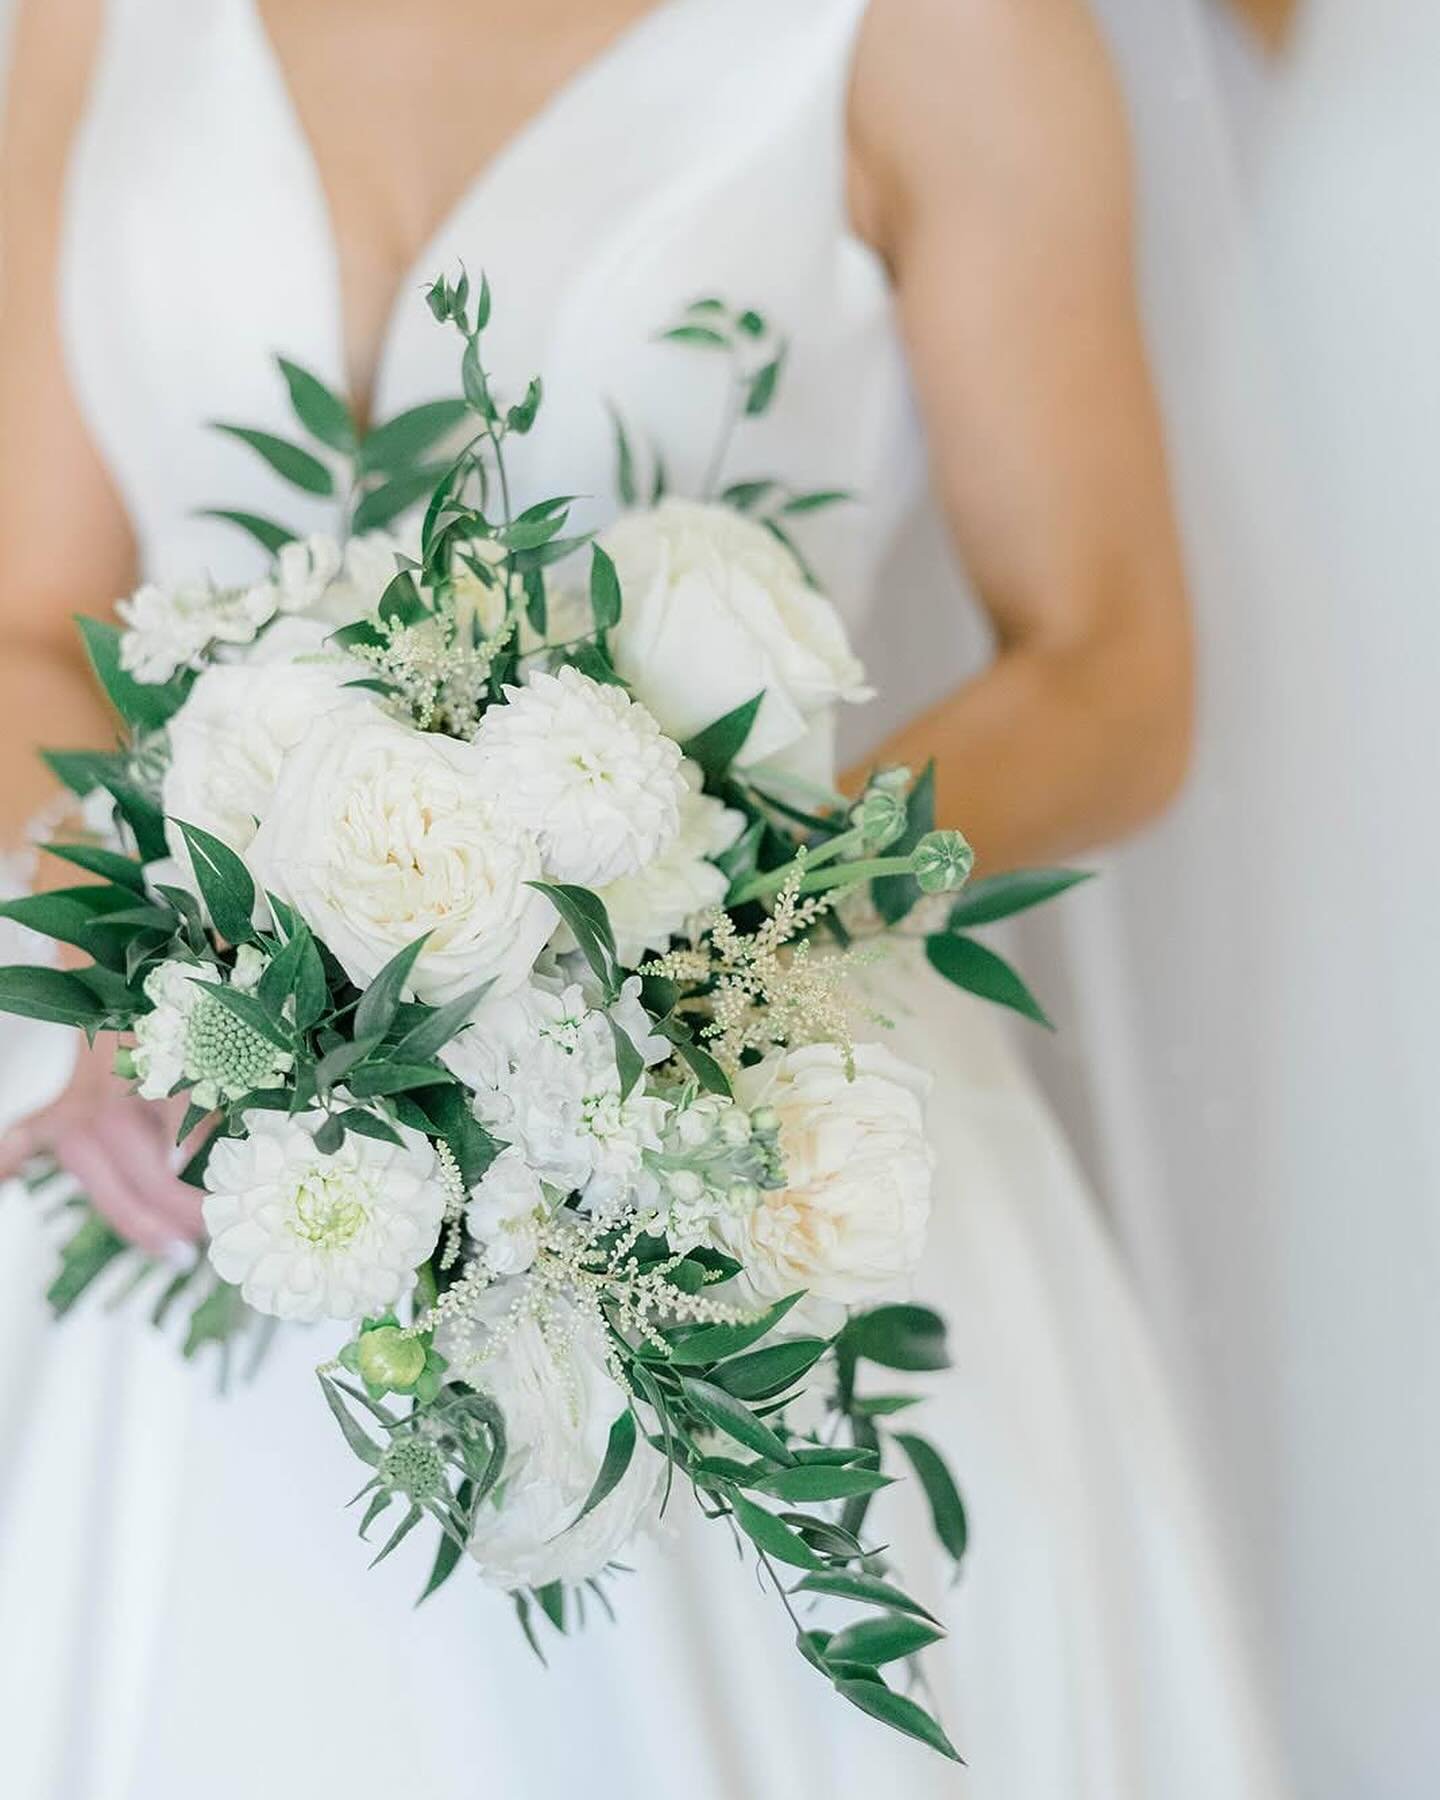 All white florals don&rsquo;t have to be boring! Sneaking in some texture and dimension is one of our favorite things to do when working with a monochromatic palette. 
&bull;
There&rsquo;s something to be said for a monochromatic bouquet that still h